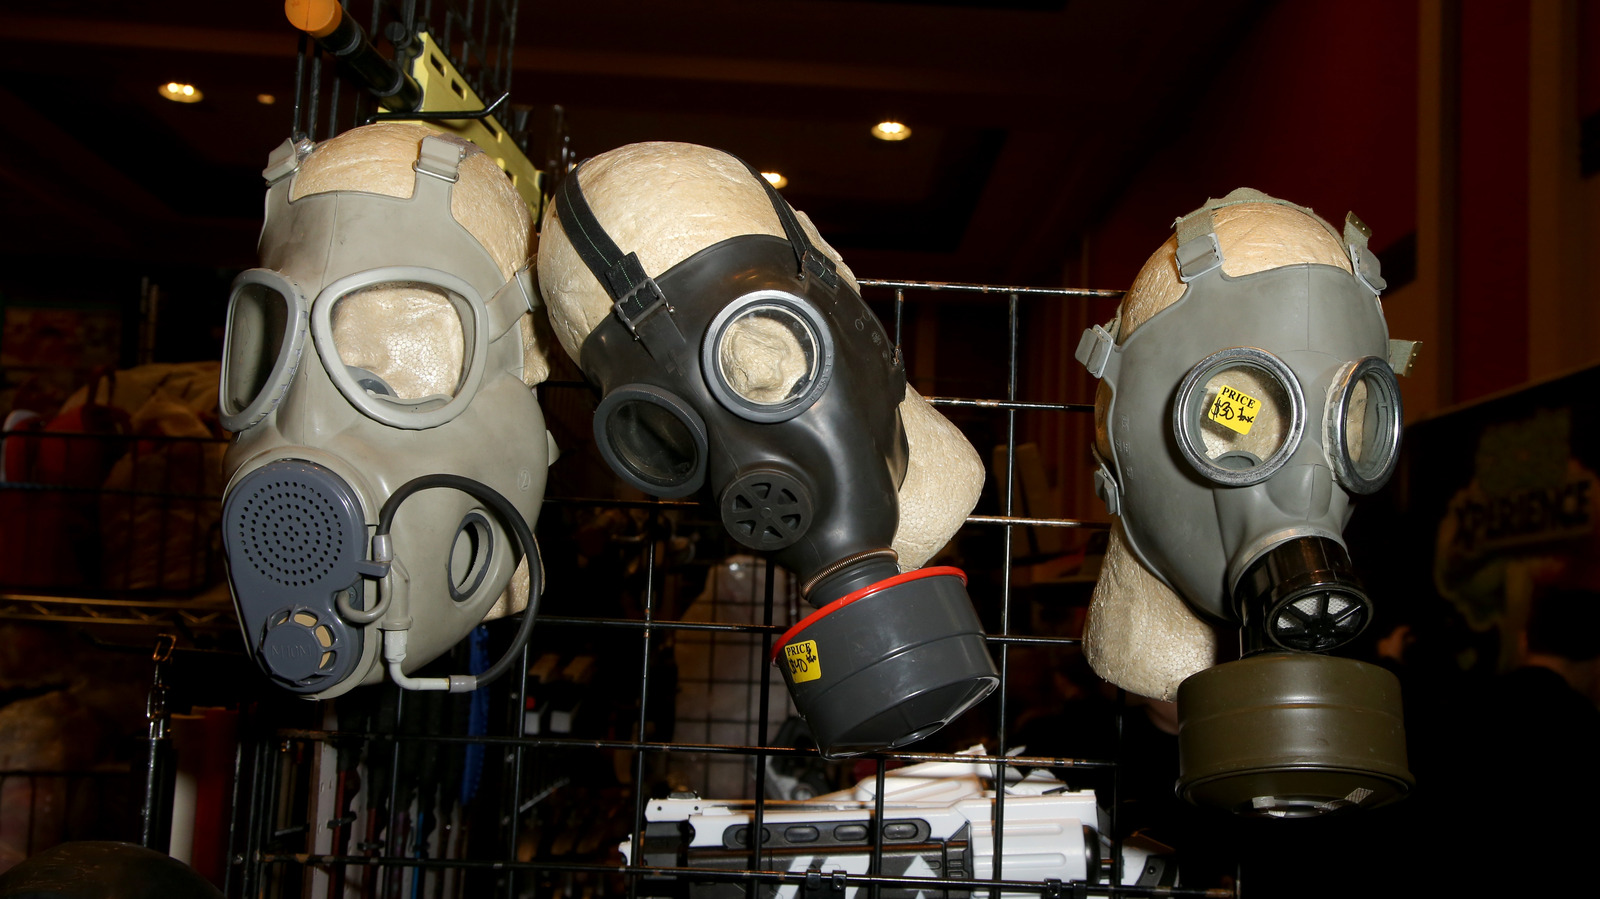 Who Invented The Gas Mask?